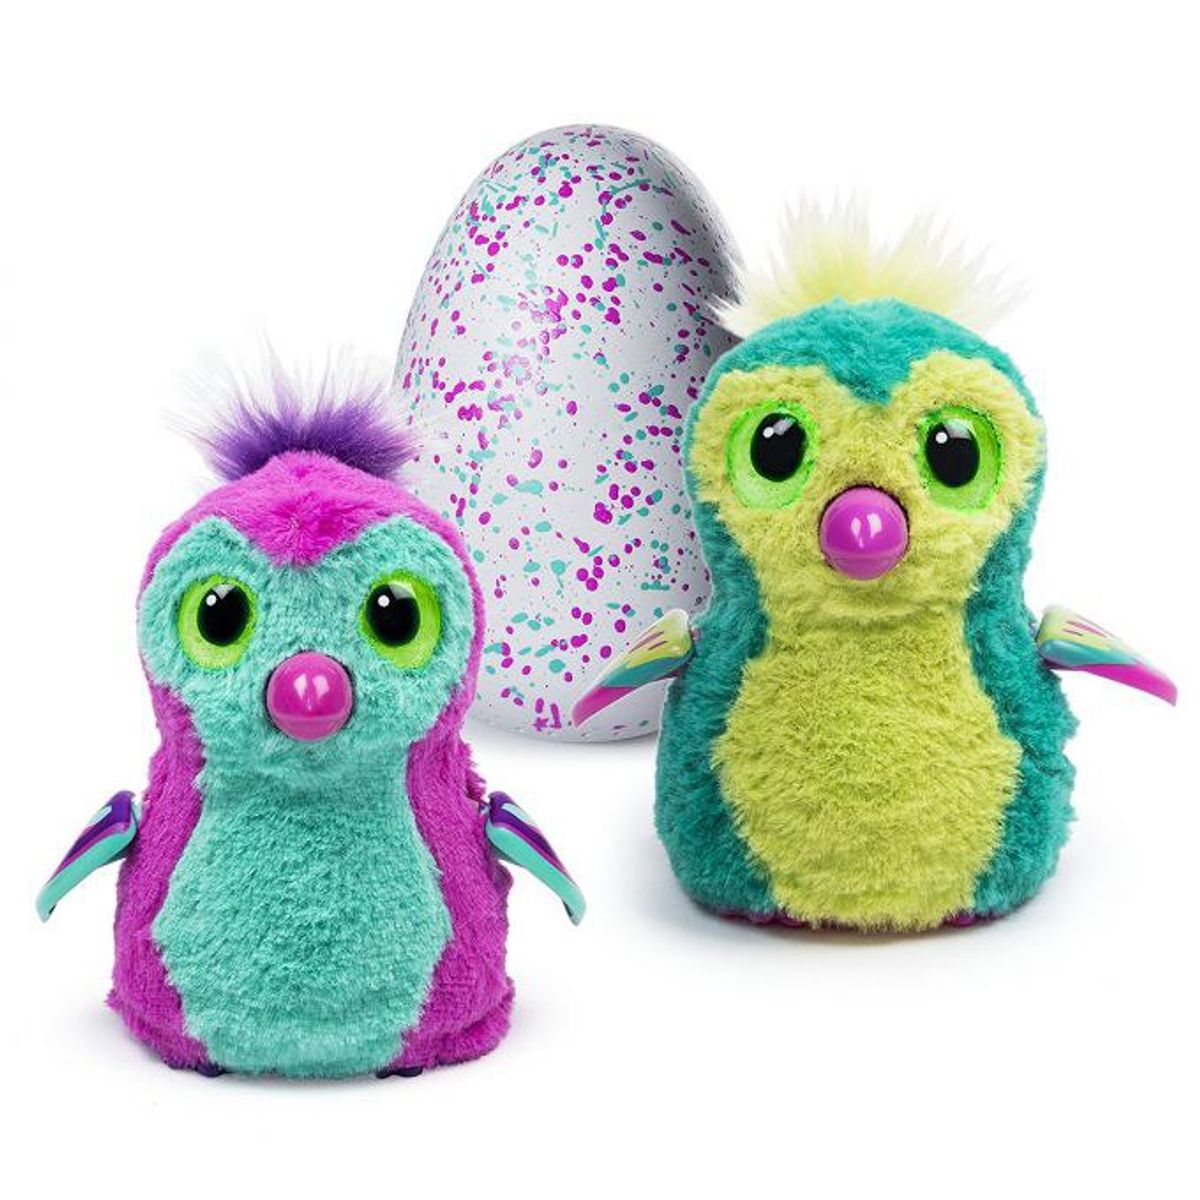 Hatchimals- Who will you hatch?